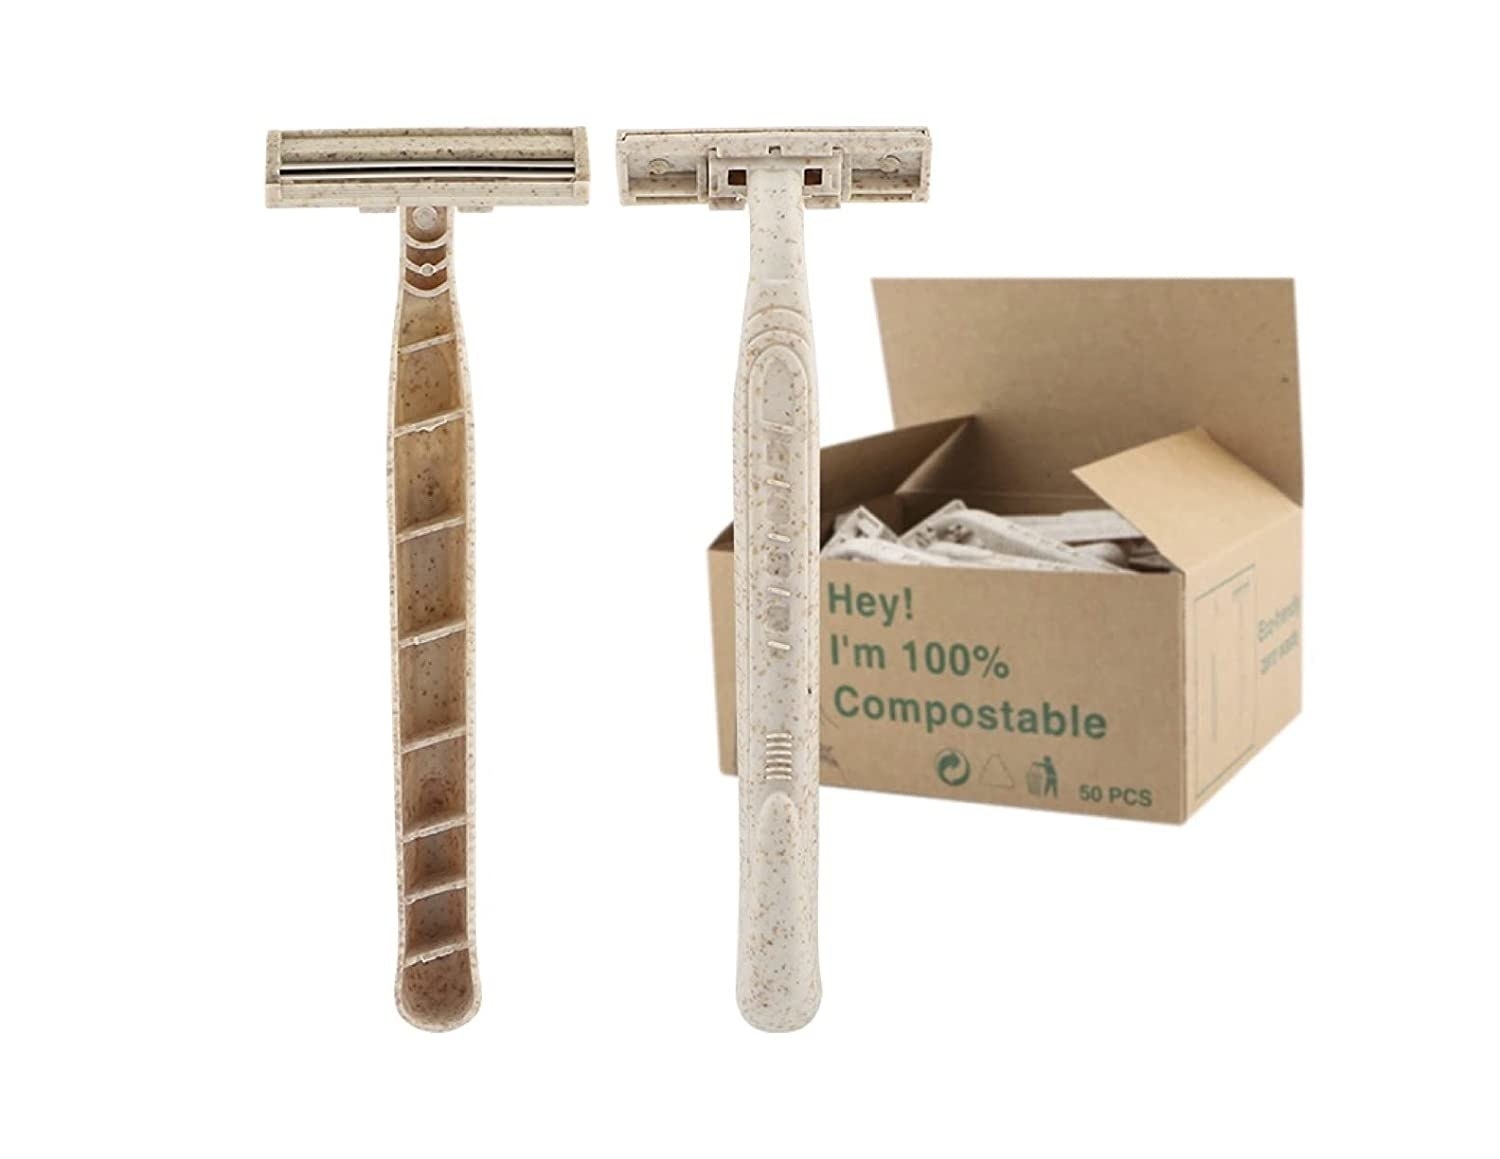 The razors with 100% compostable box